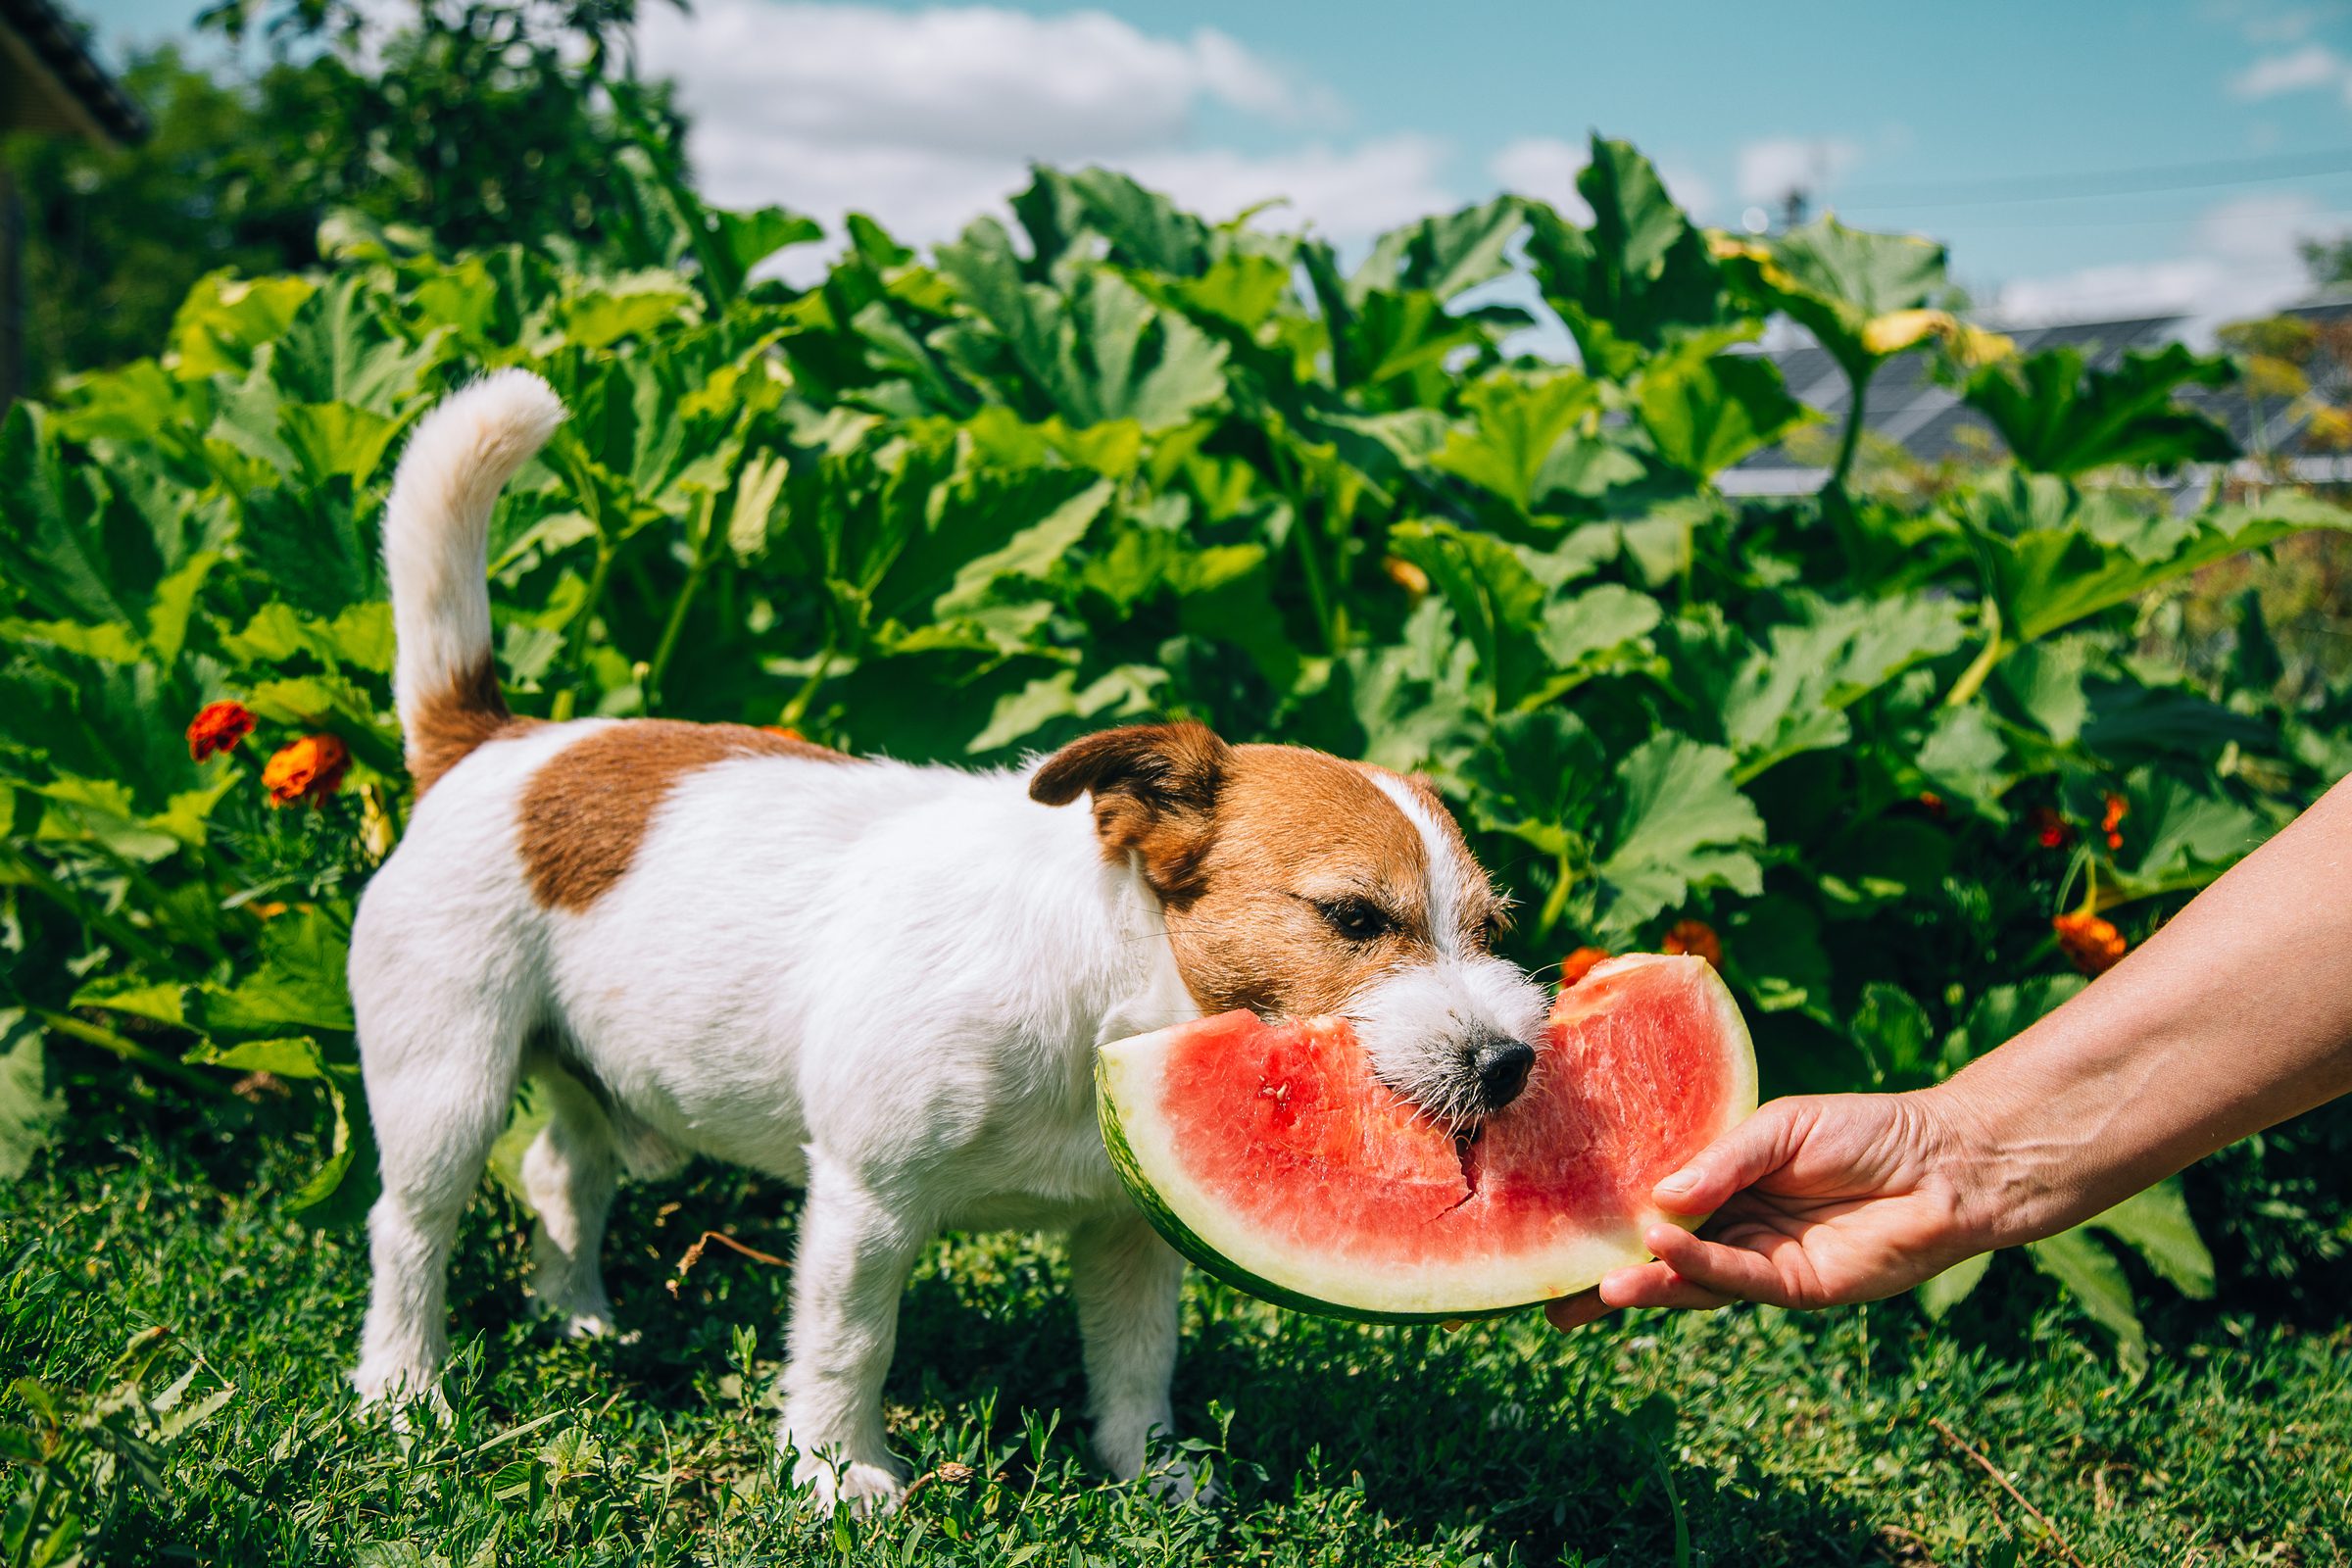 Can Dogs Eat Watermelon? Here's the Juicy Verdict, from Veterinarians